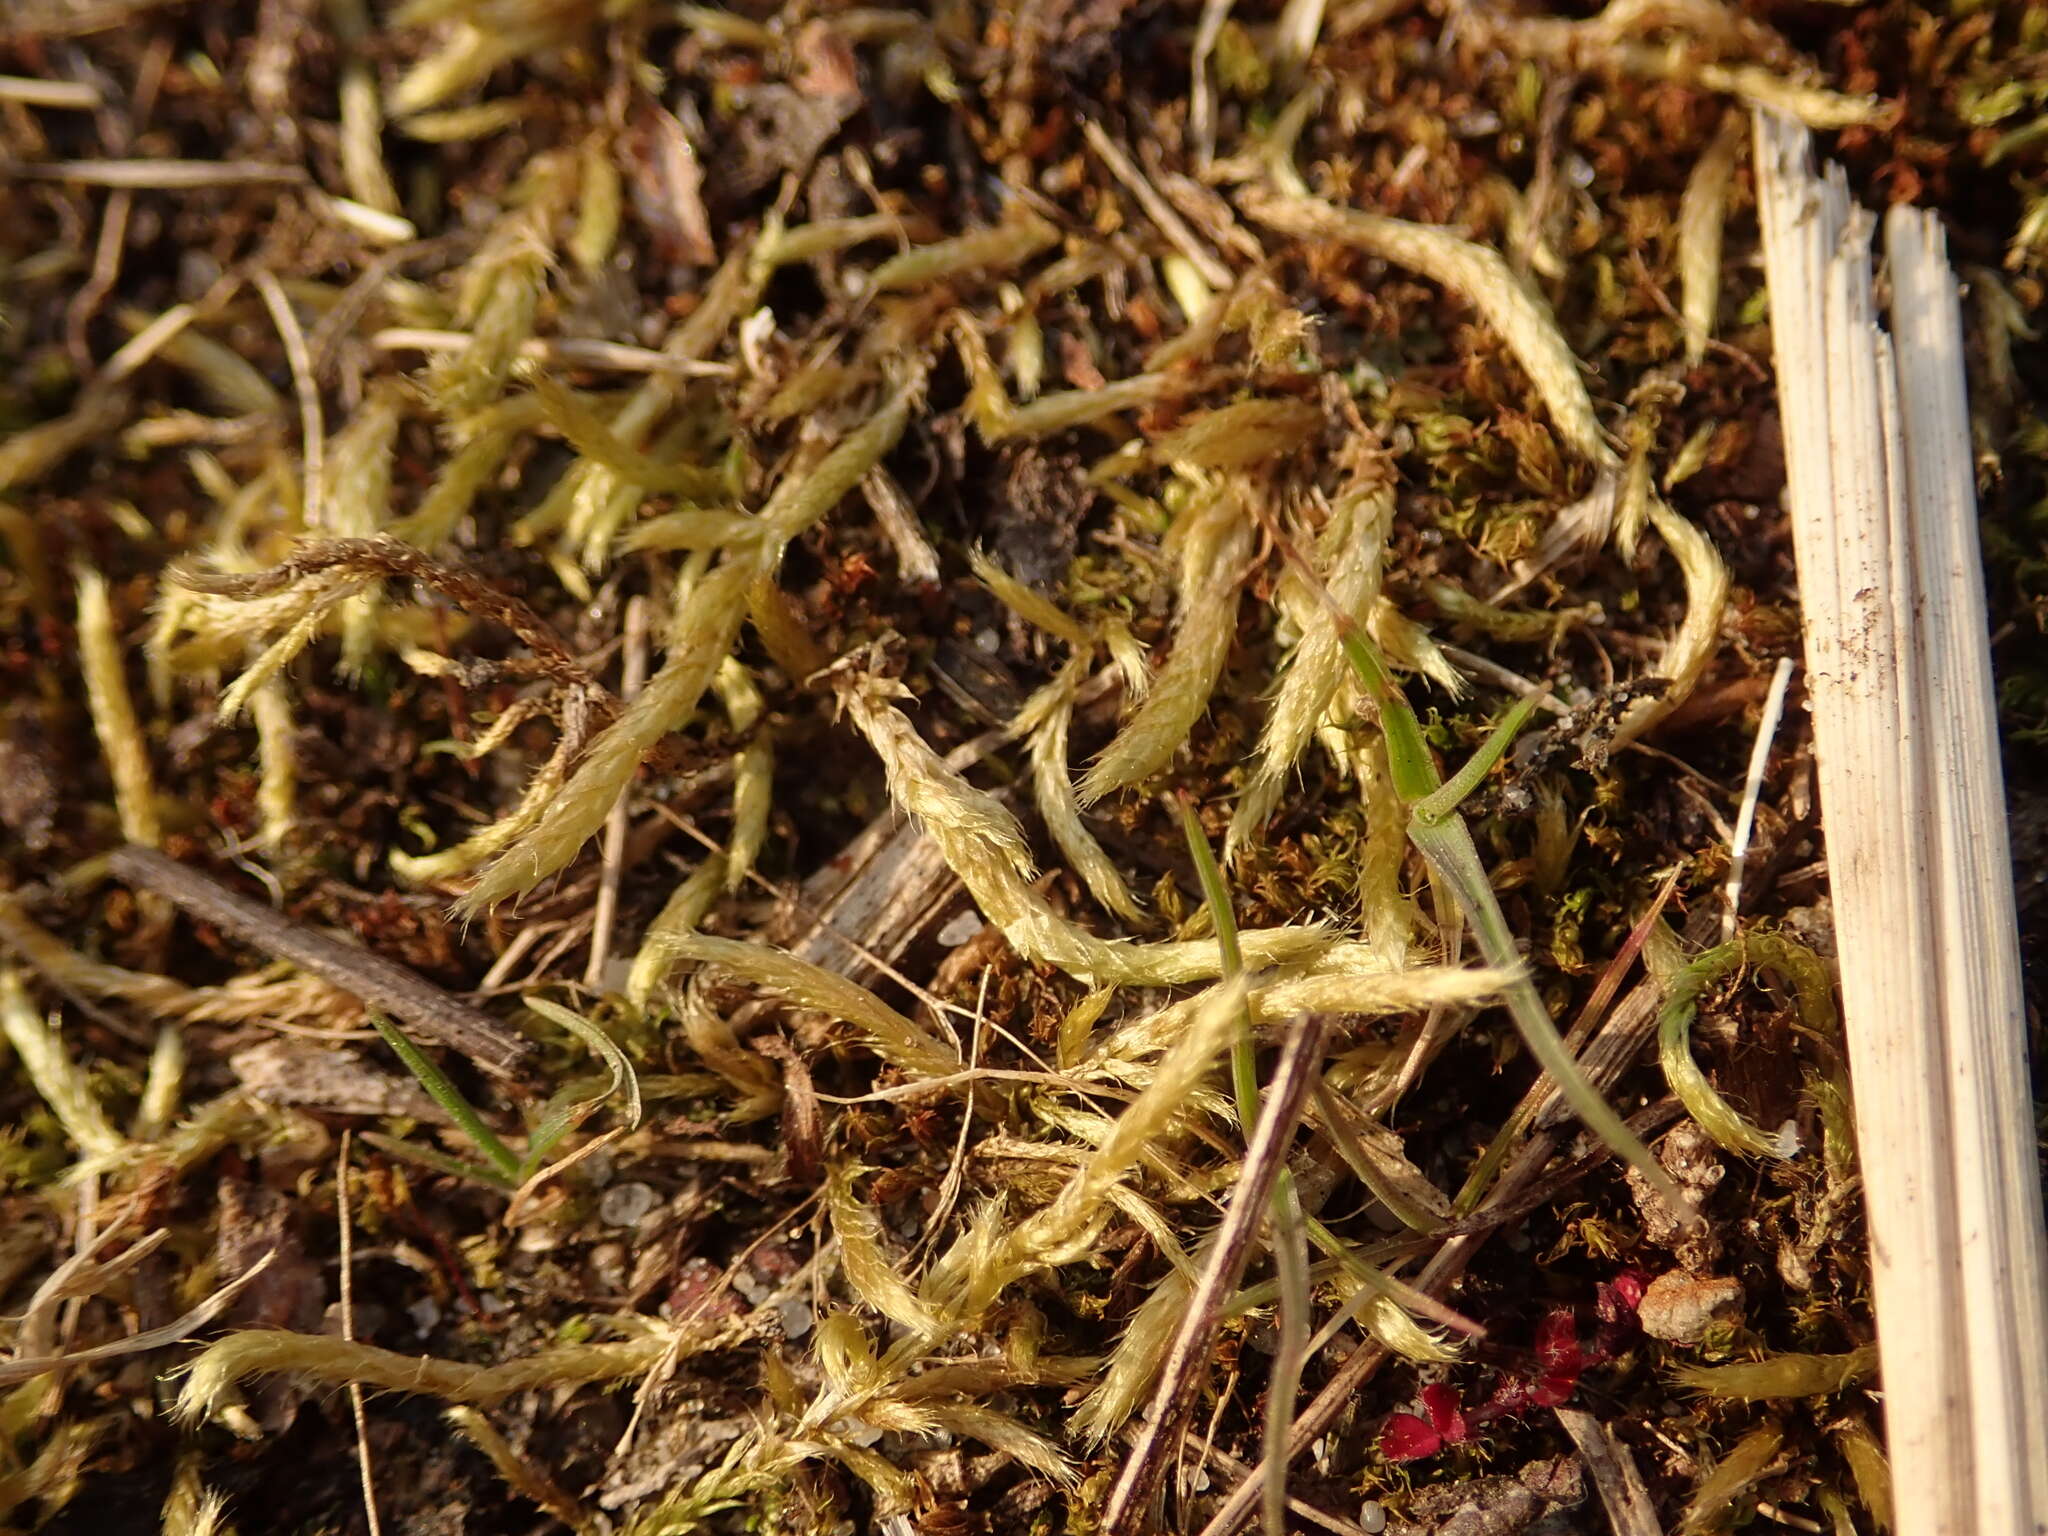 Image of lawn moss